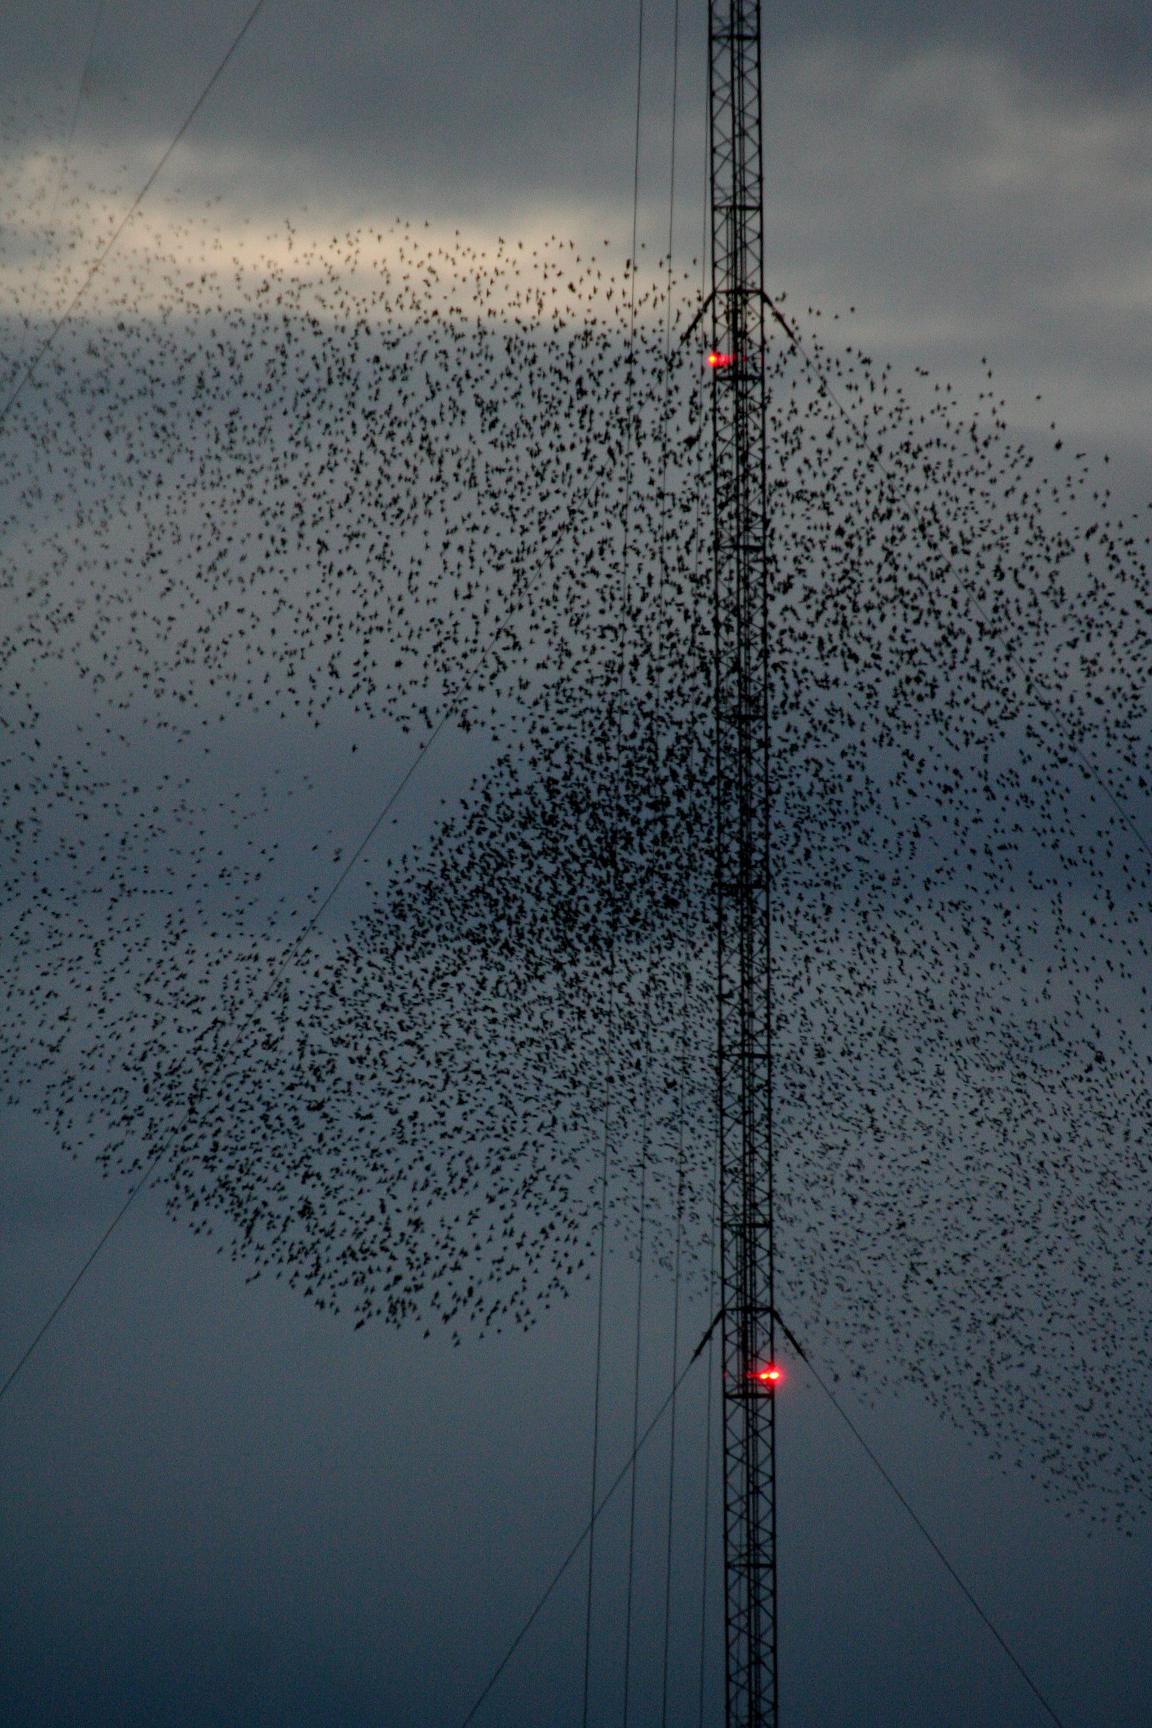 Thousands of starlings flock over Strathbeg. Photo taken by Lisa Trainer.